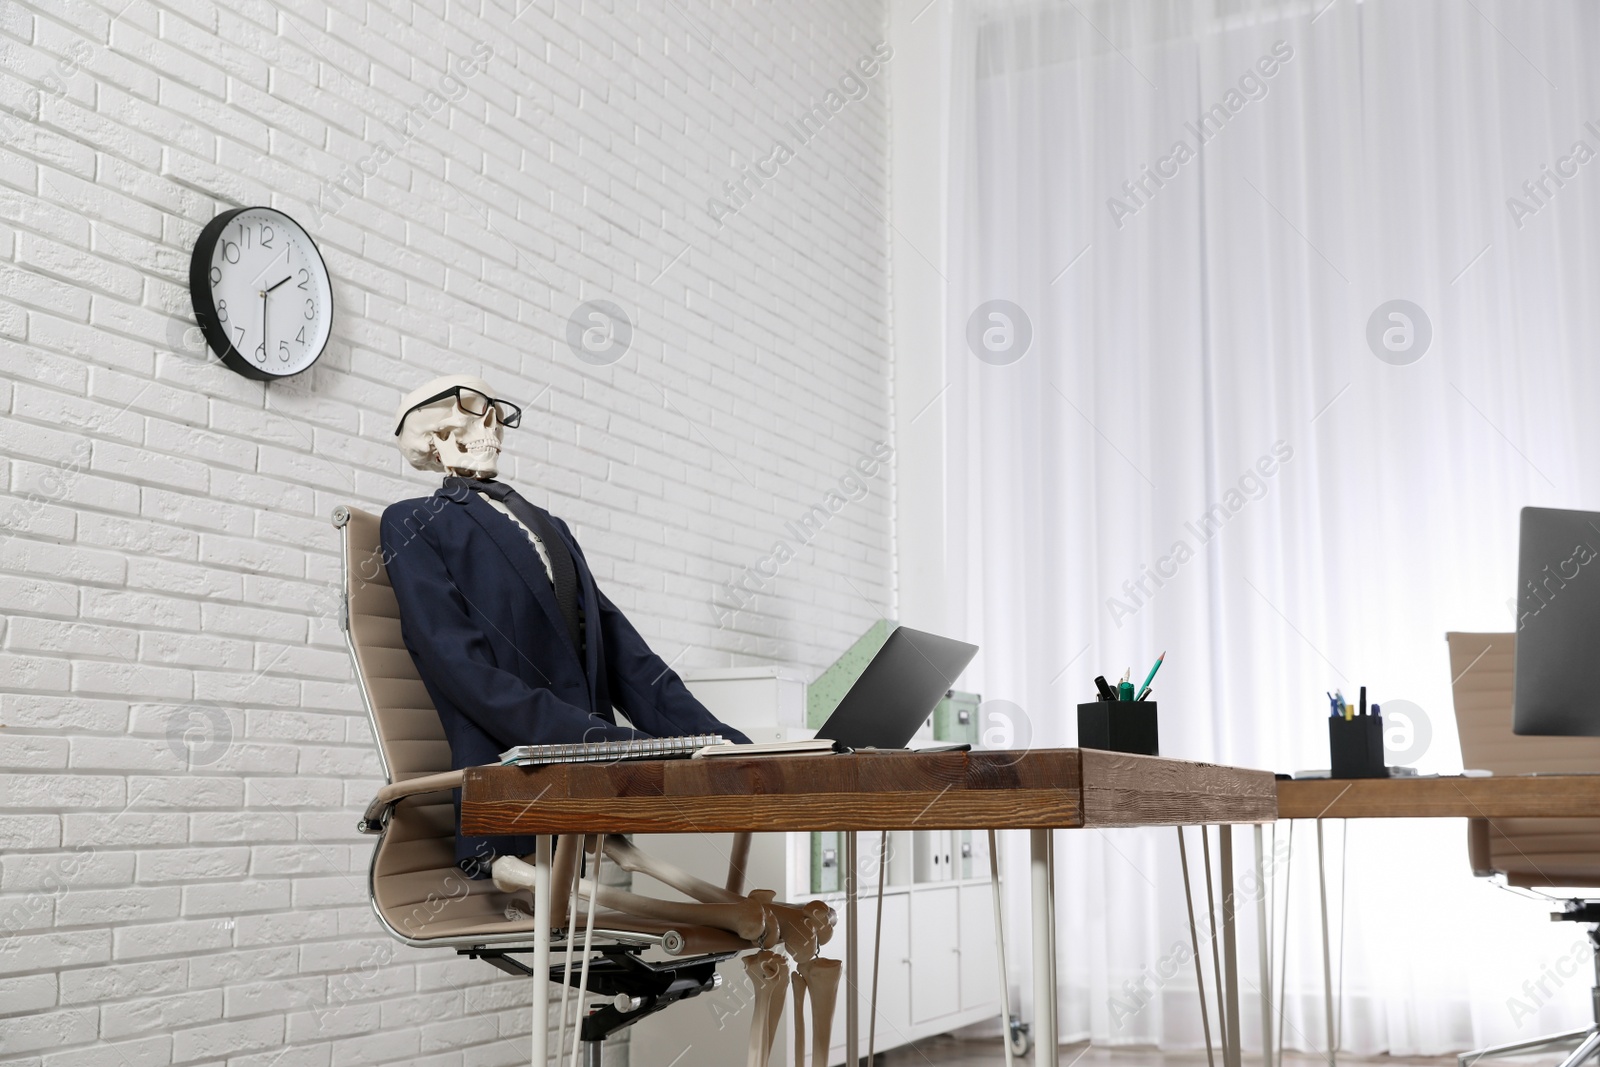 Photo of Human skeleton in suit using laptop at table in office